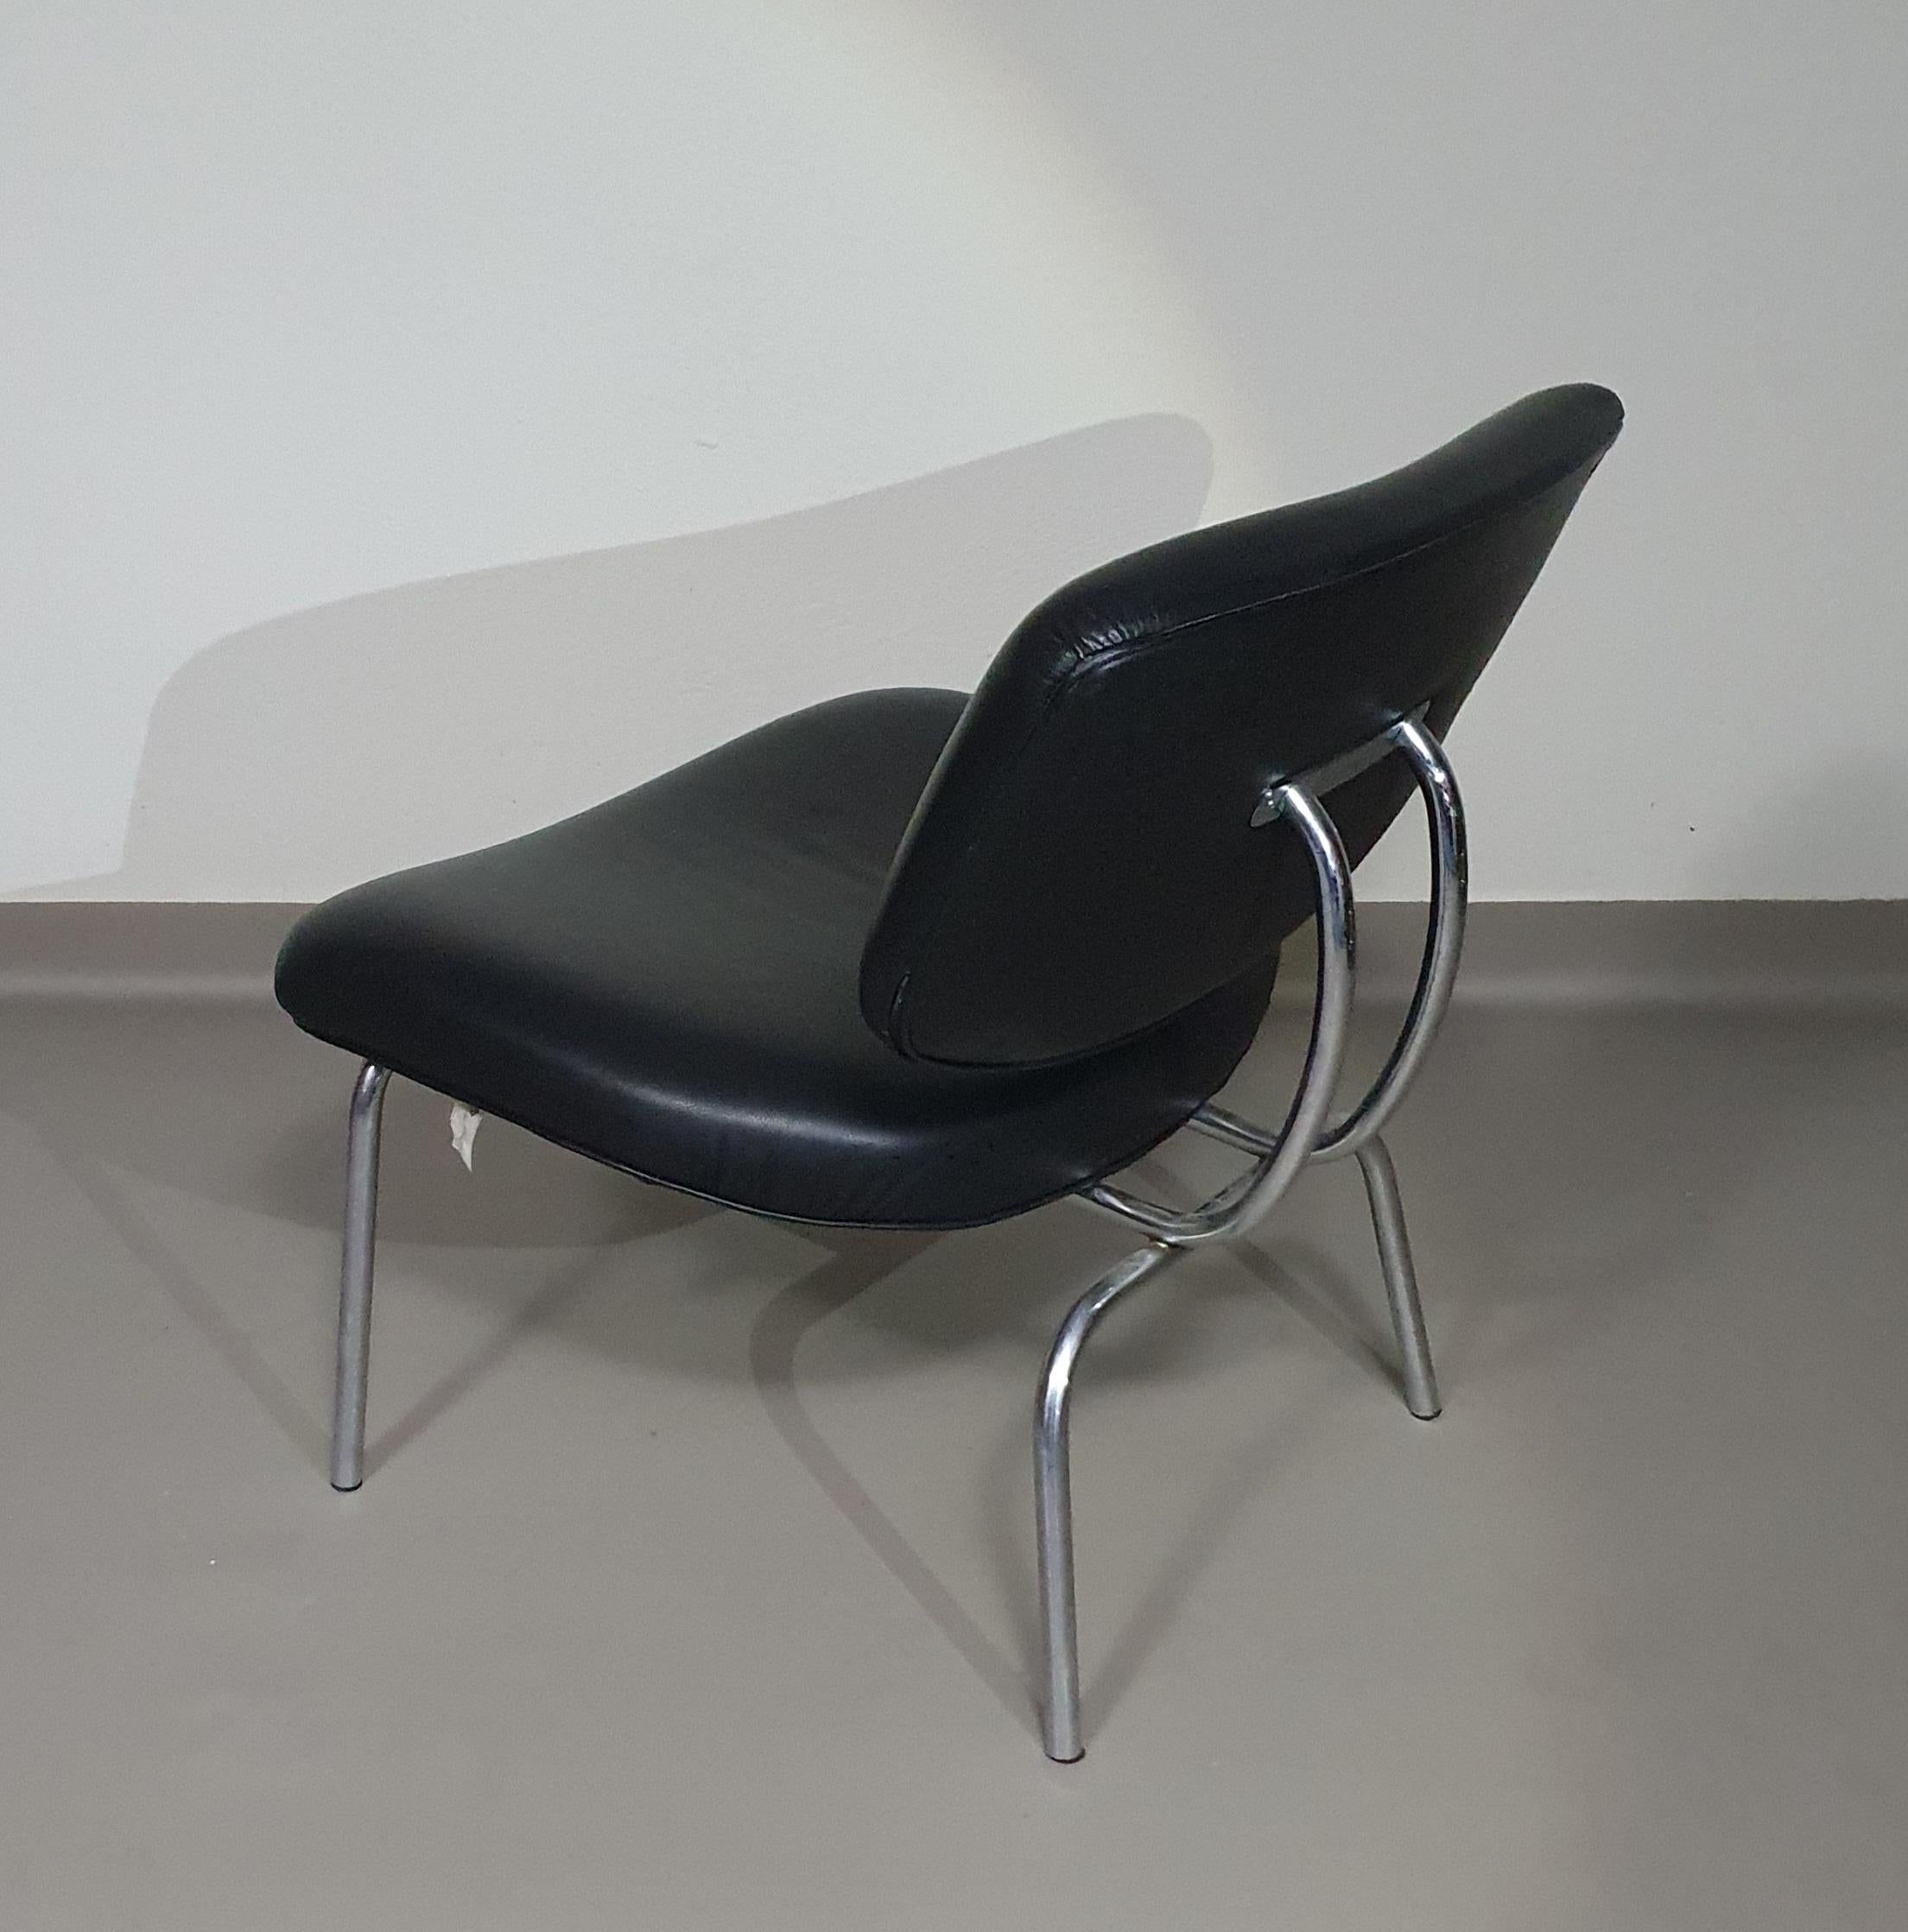 Zanotta Clea lounge chair / pouf in black leather / 1997 by Kristiina Lassus For Sale 1